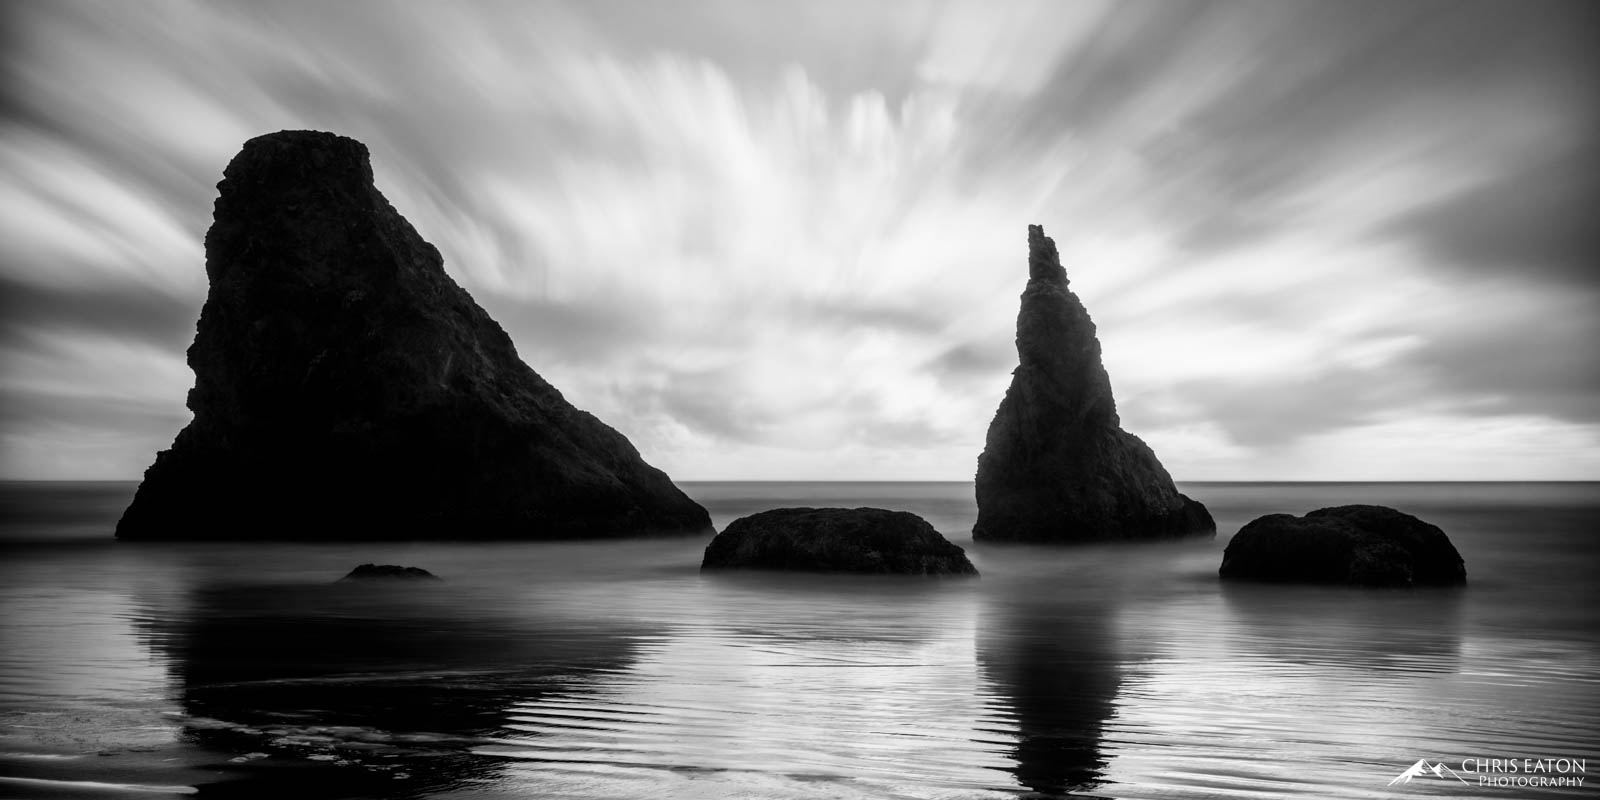 Late evening clouds move in over the Sea Stacks of Bandon Beach.